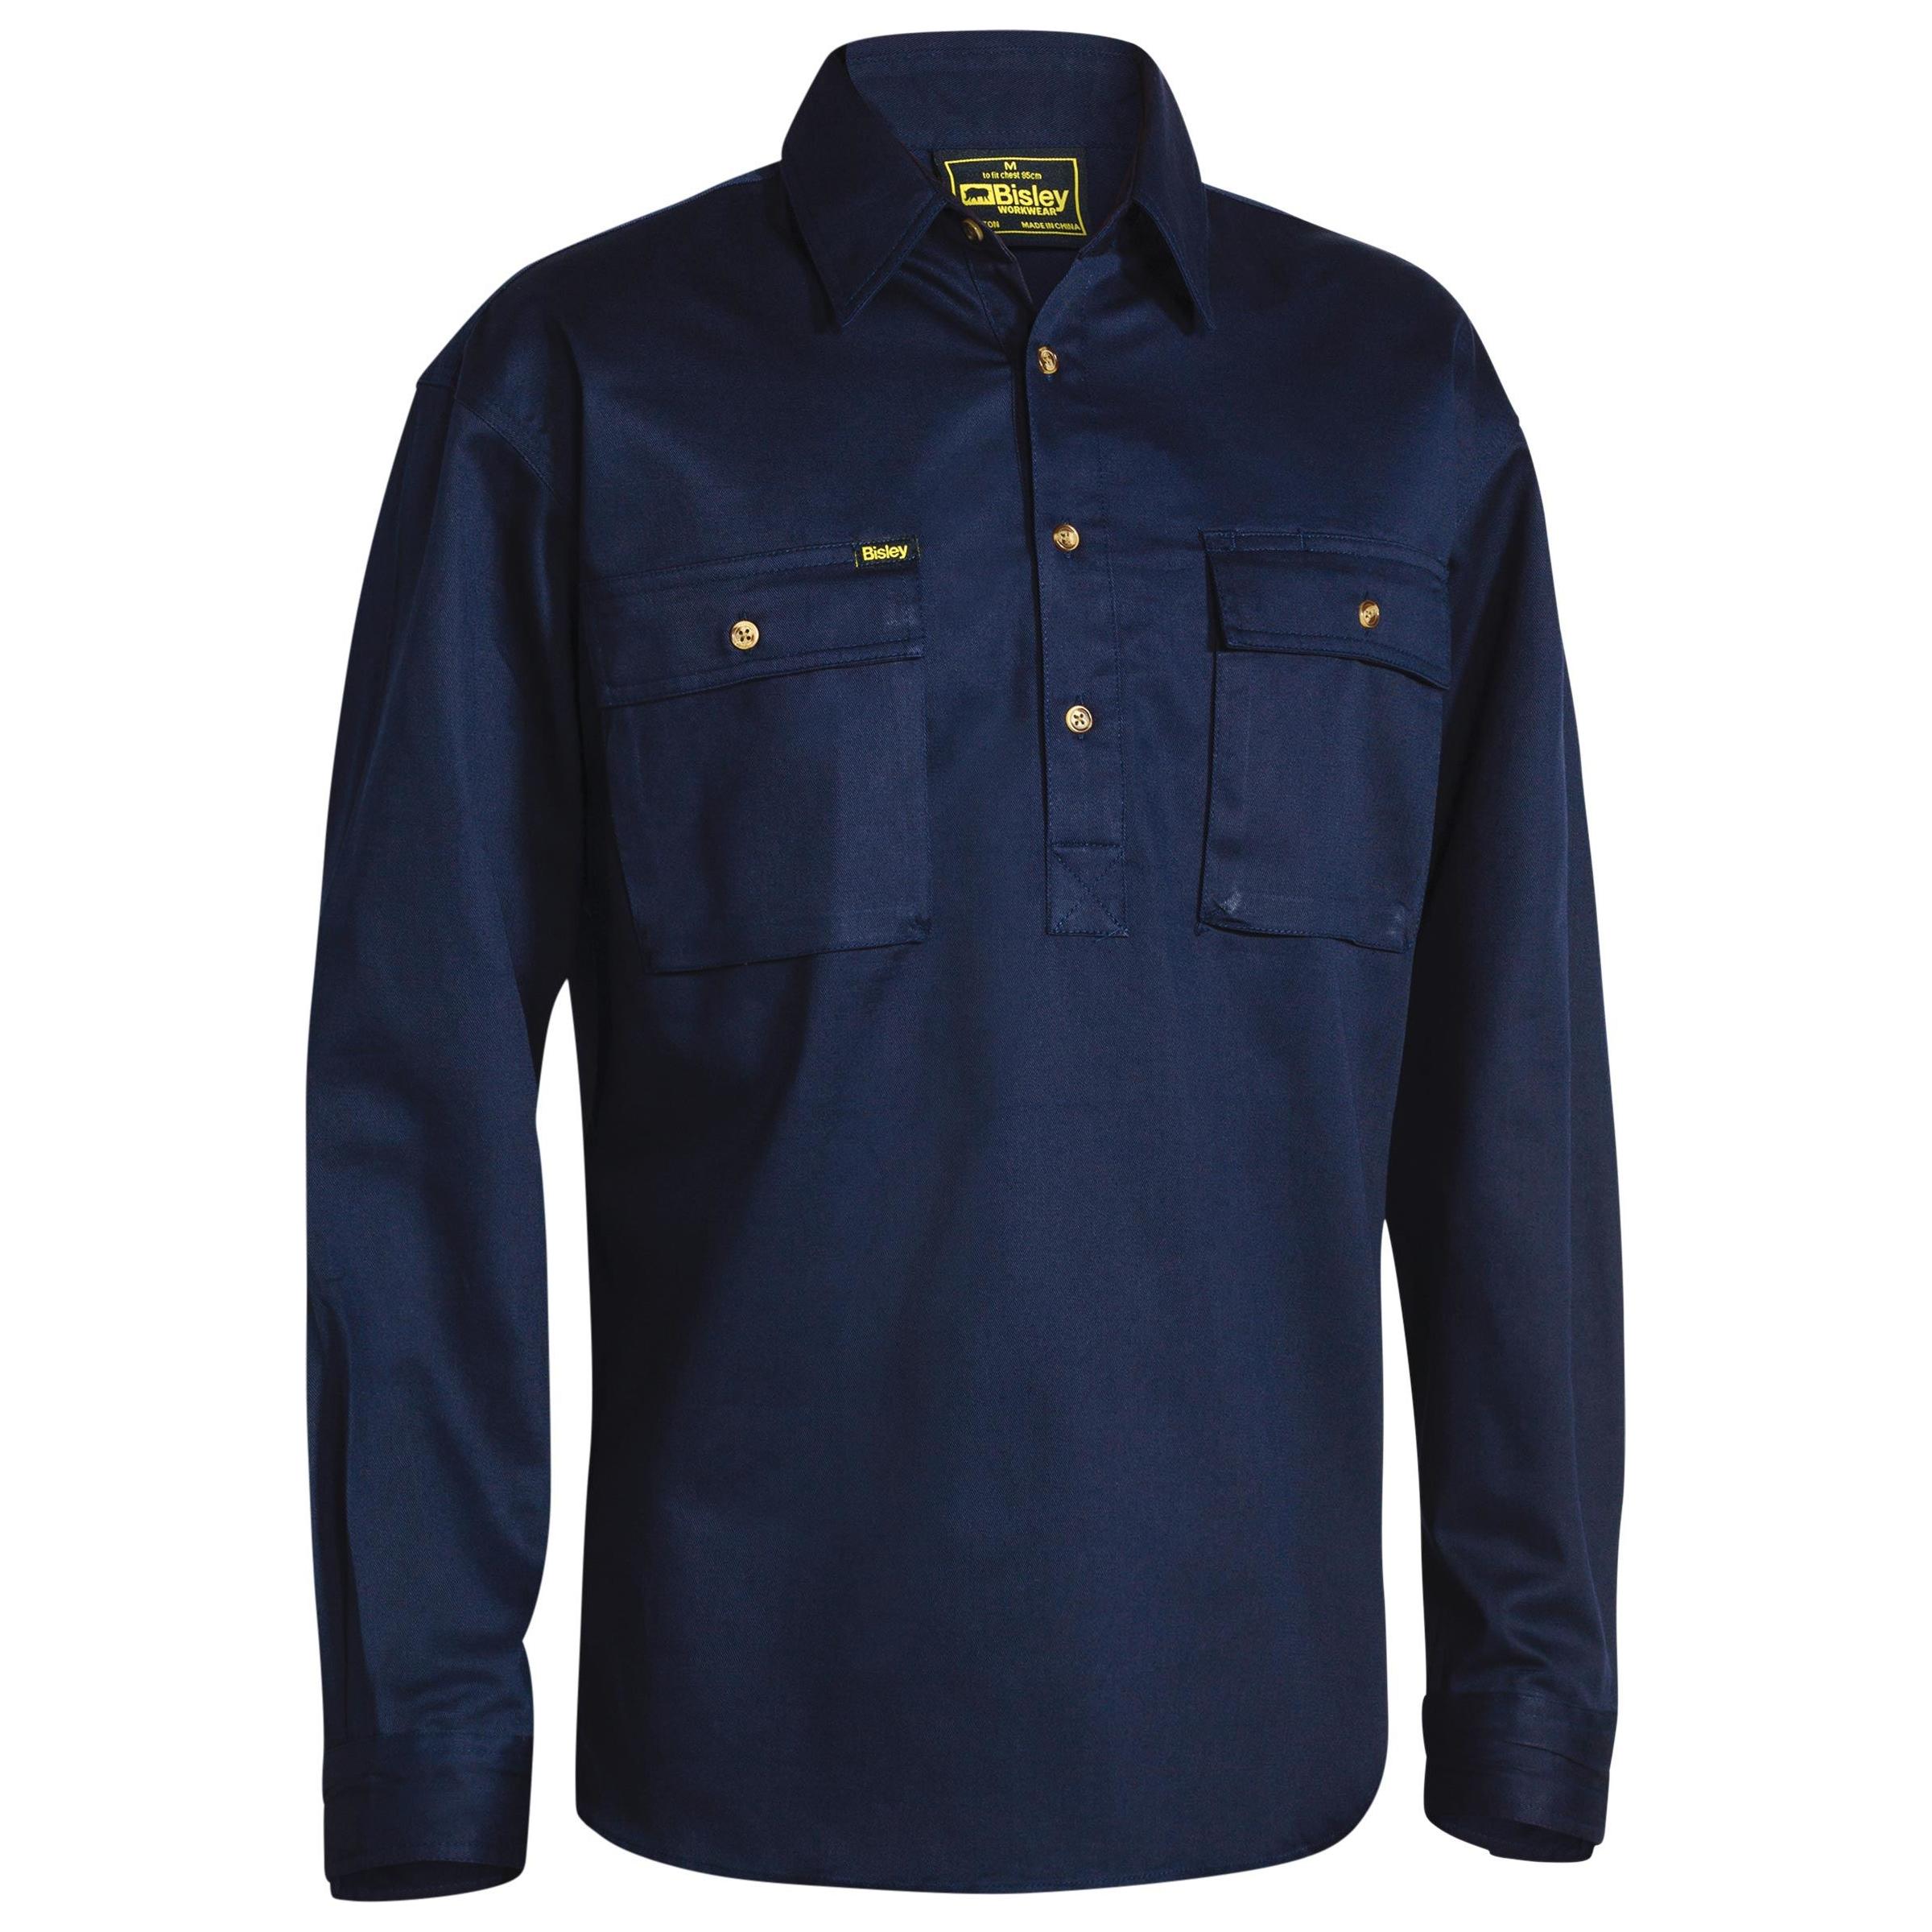 Closed Front Cotton Drill Shirt - BSC6433